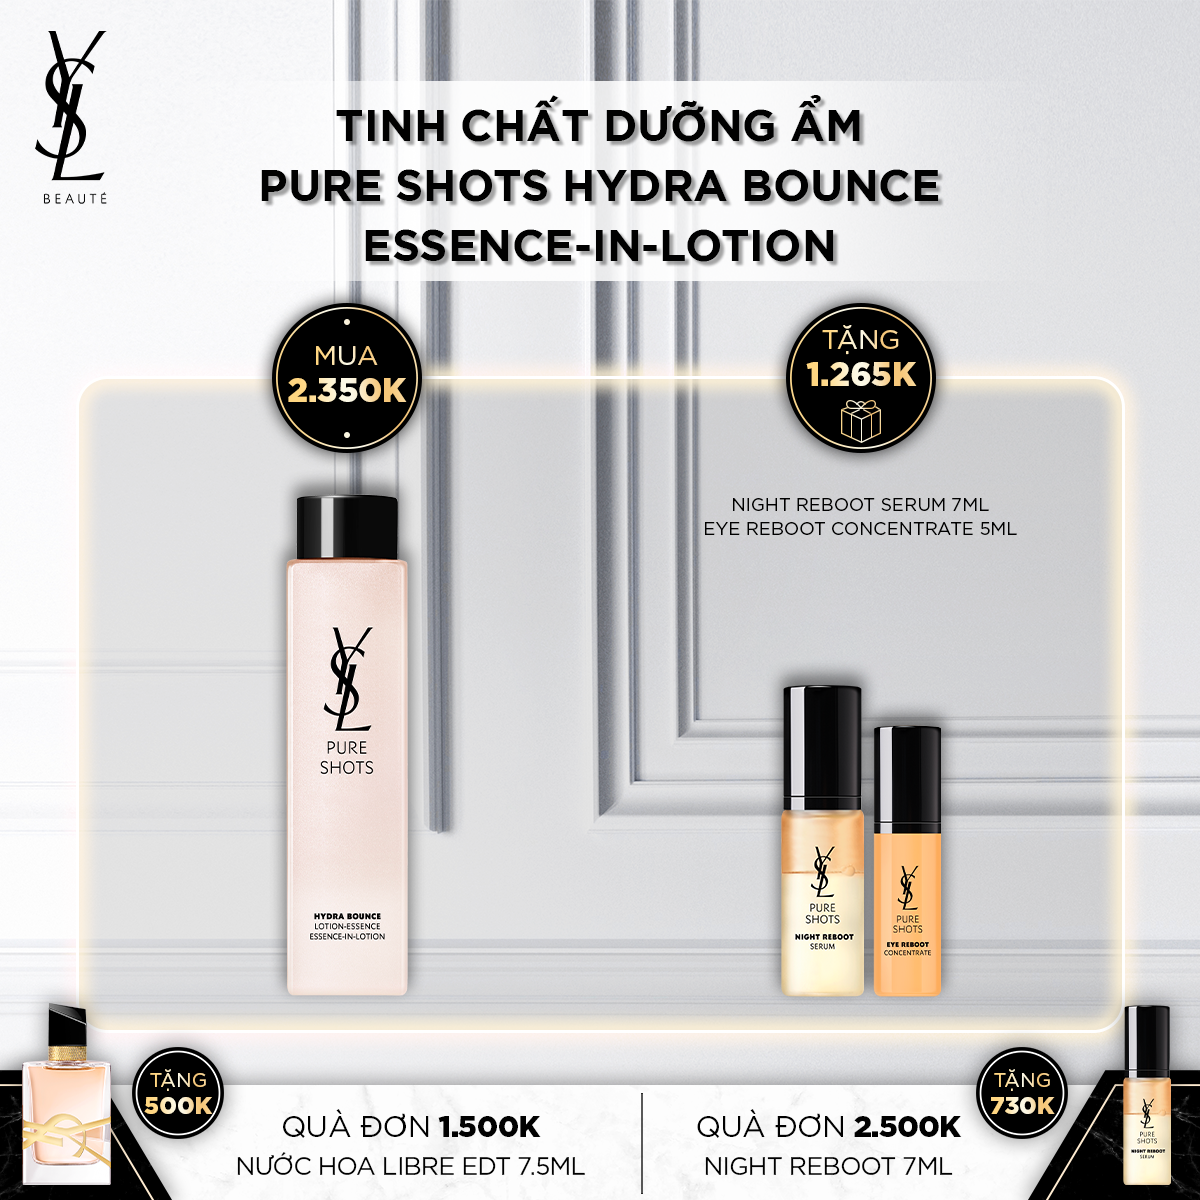 Tinh Chất Dưỡng Ẩm Pure Shots Hydra Bounce Essence-in-Lotion